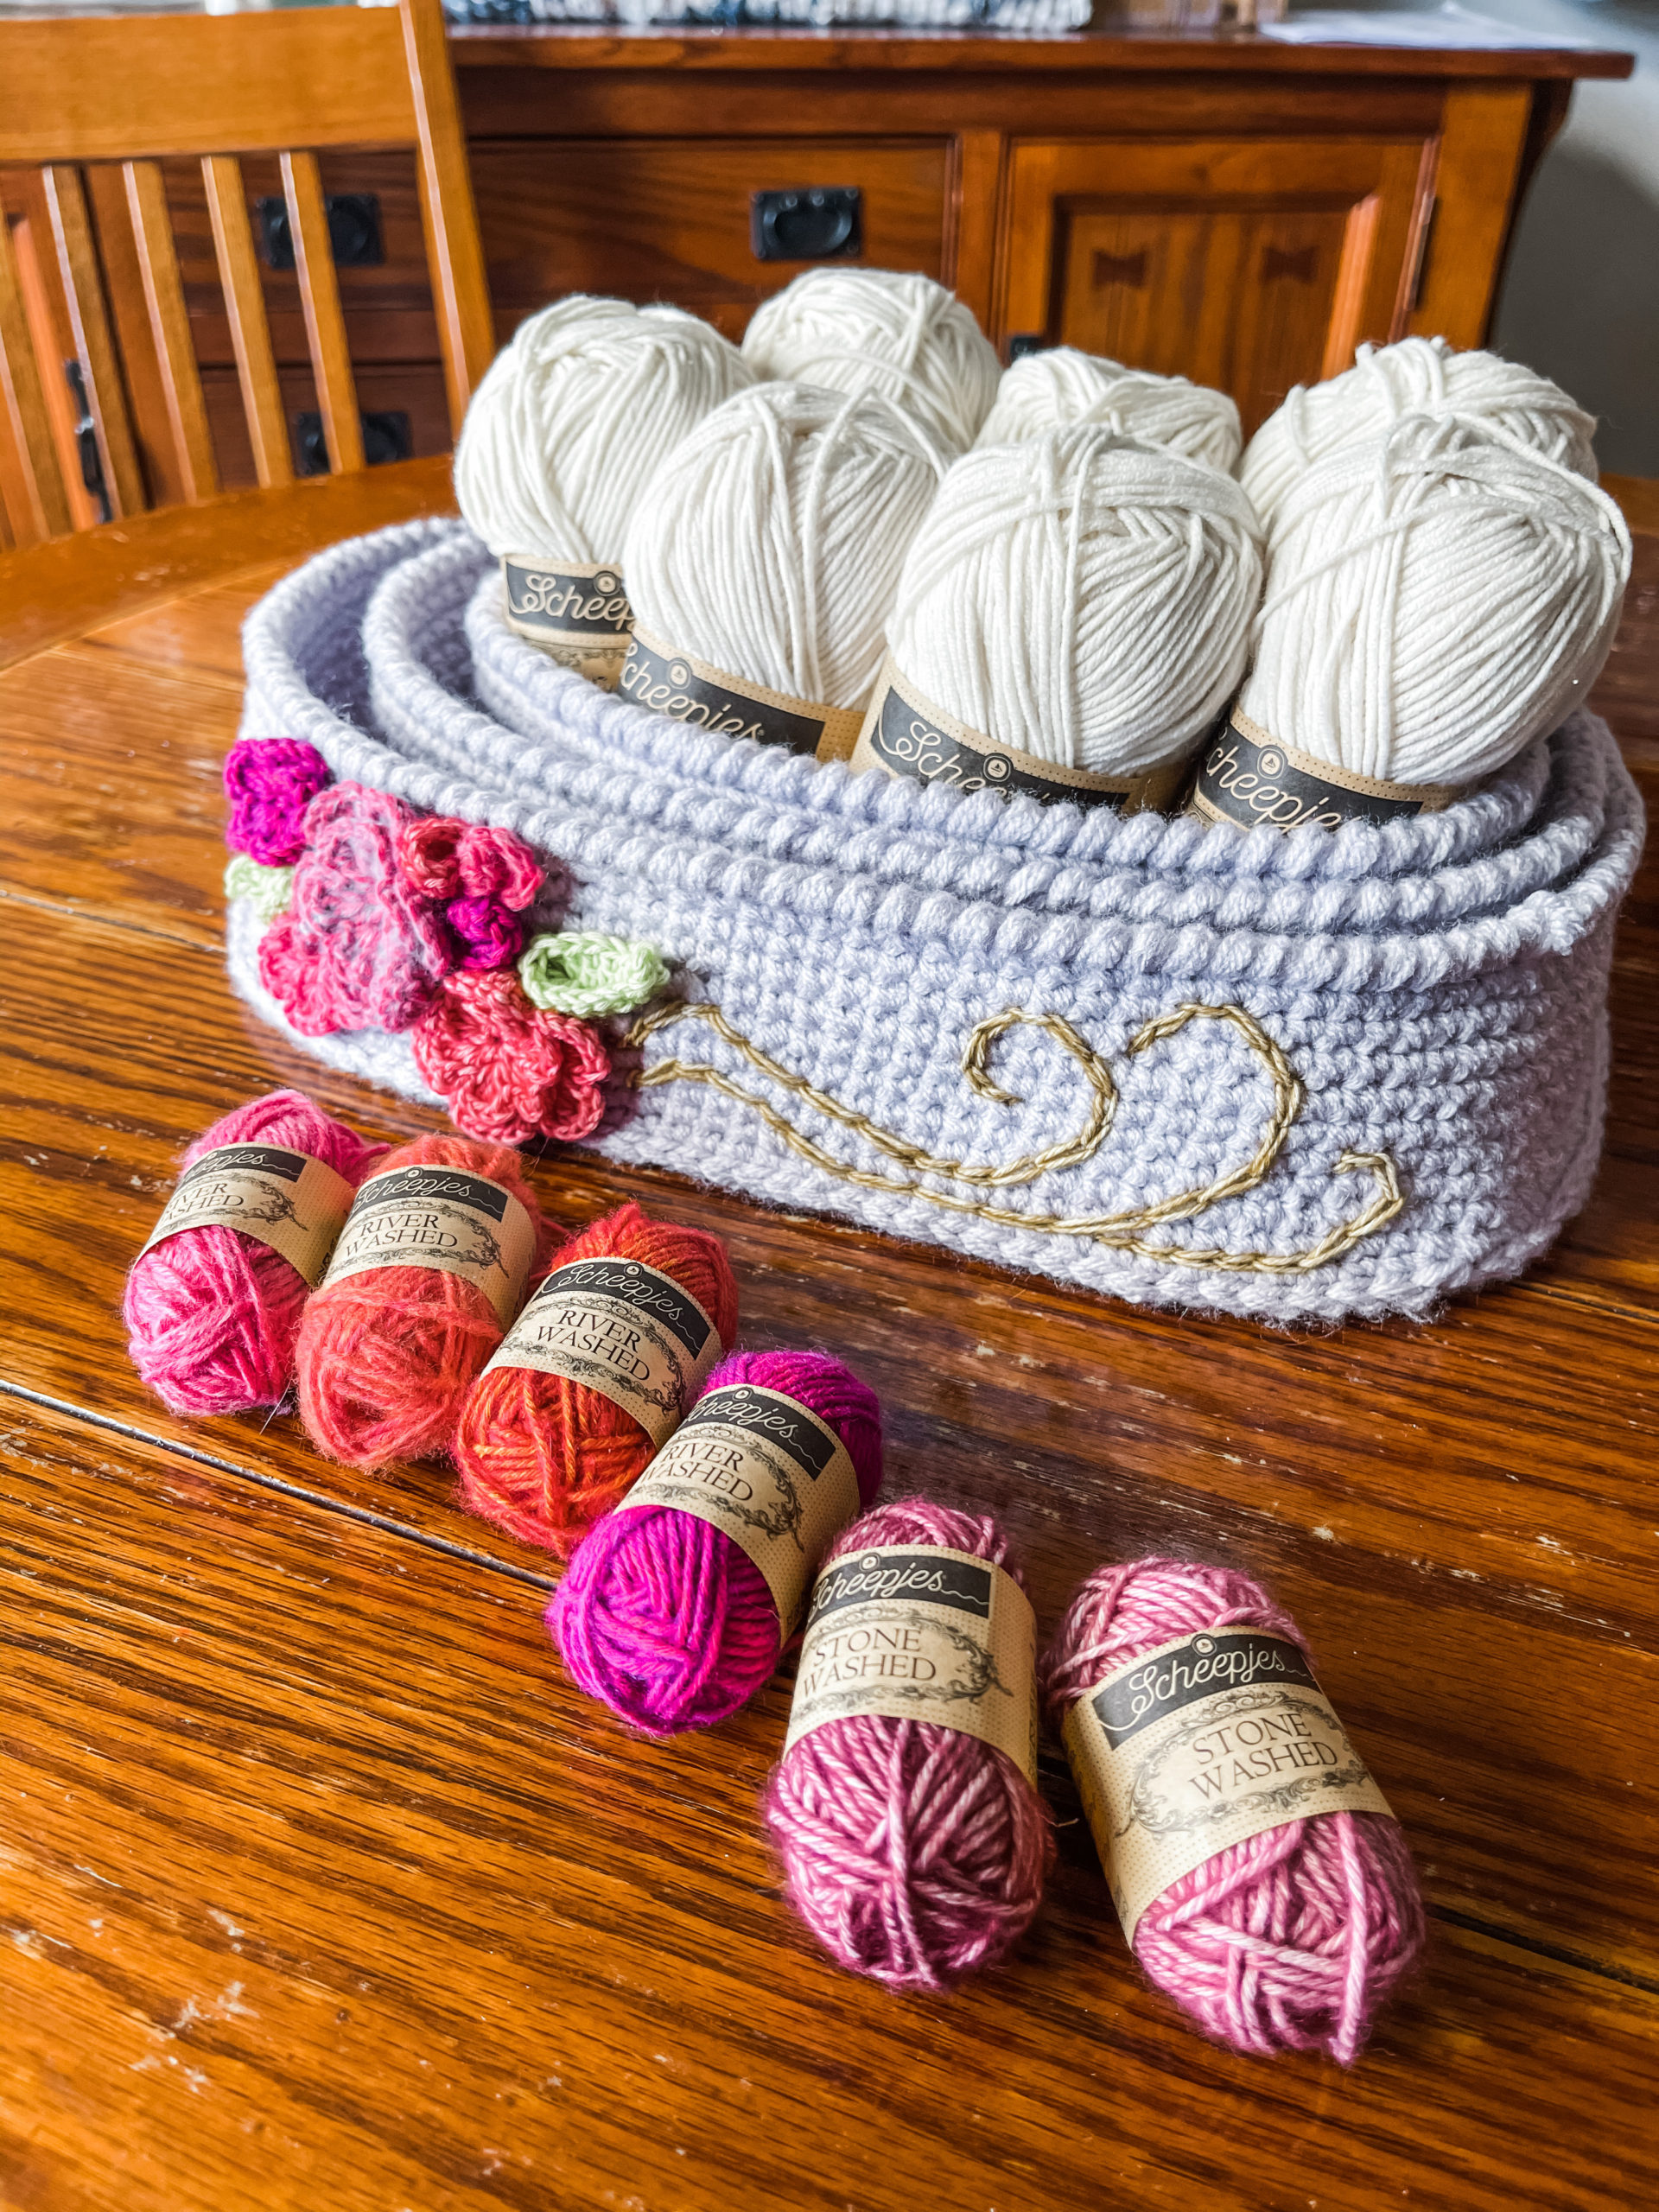 Final Reveal: Crochet Nesting Baskets with Wooden Base, cypress